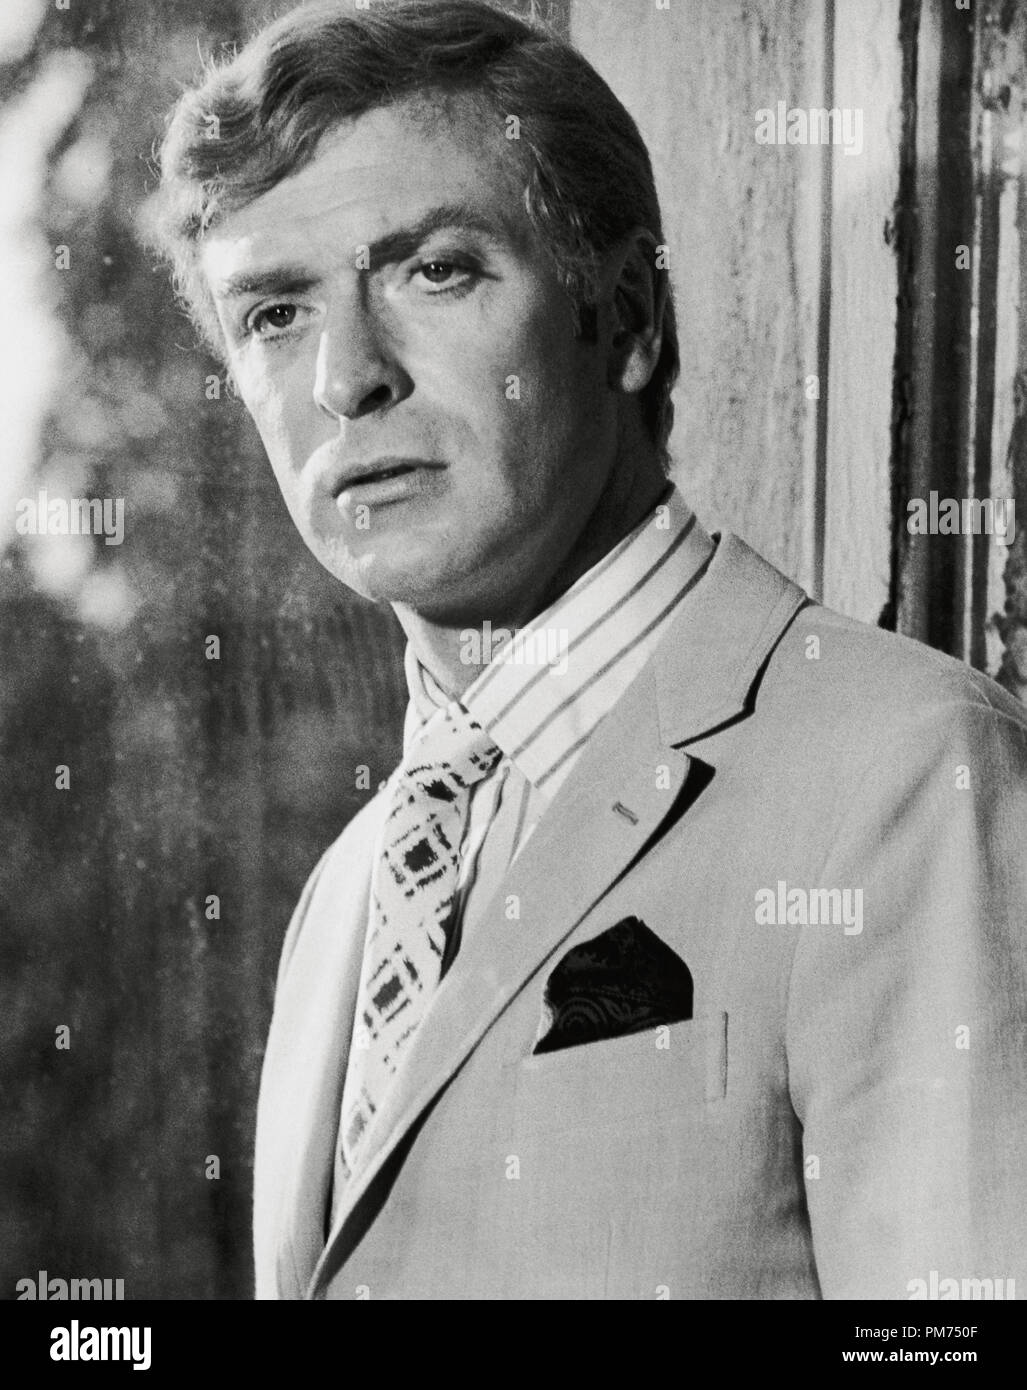 Michael Caine, 'The Italian Job' 1969.   File Reference # 30928 256THA Stock Photo